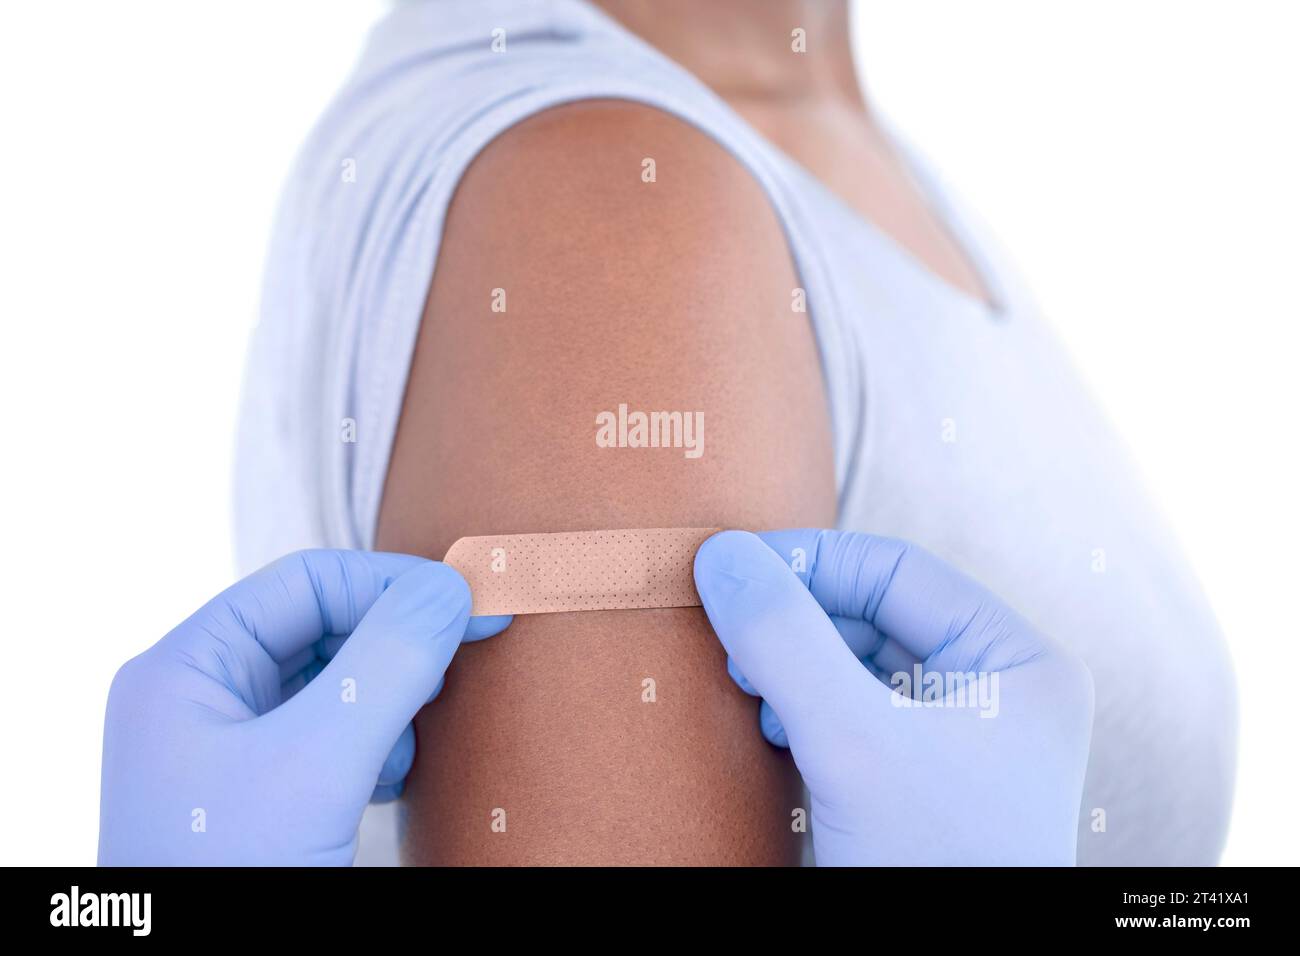 Plaster being applied to woman's arm Stock Photo